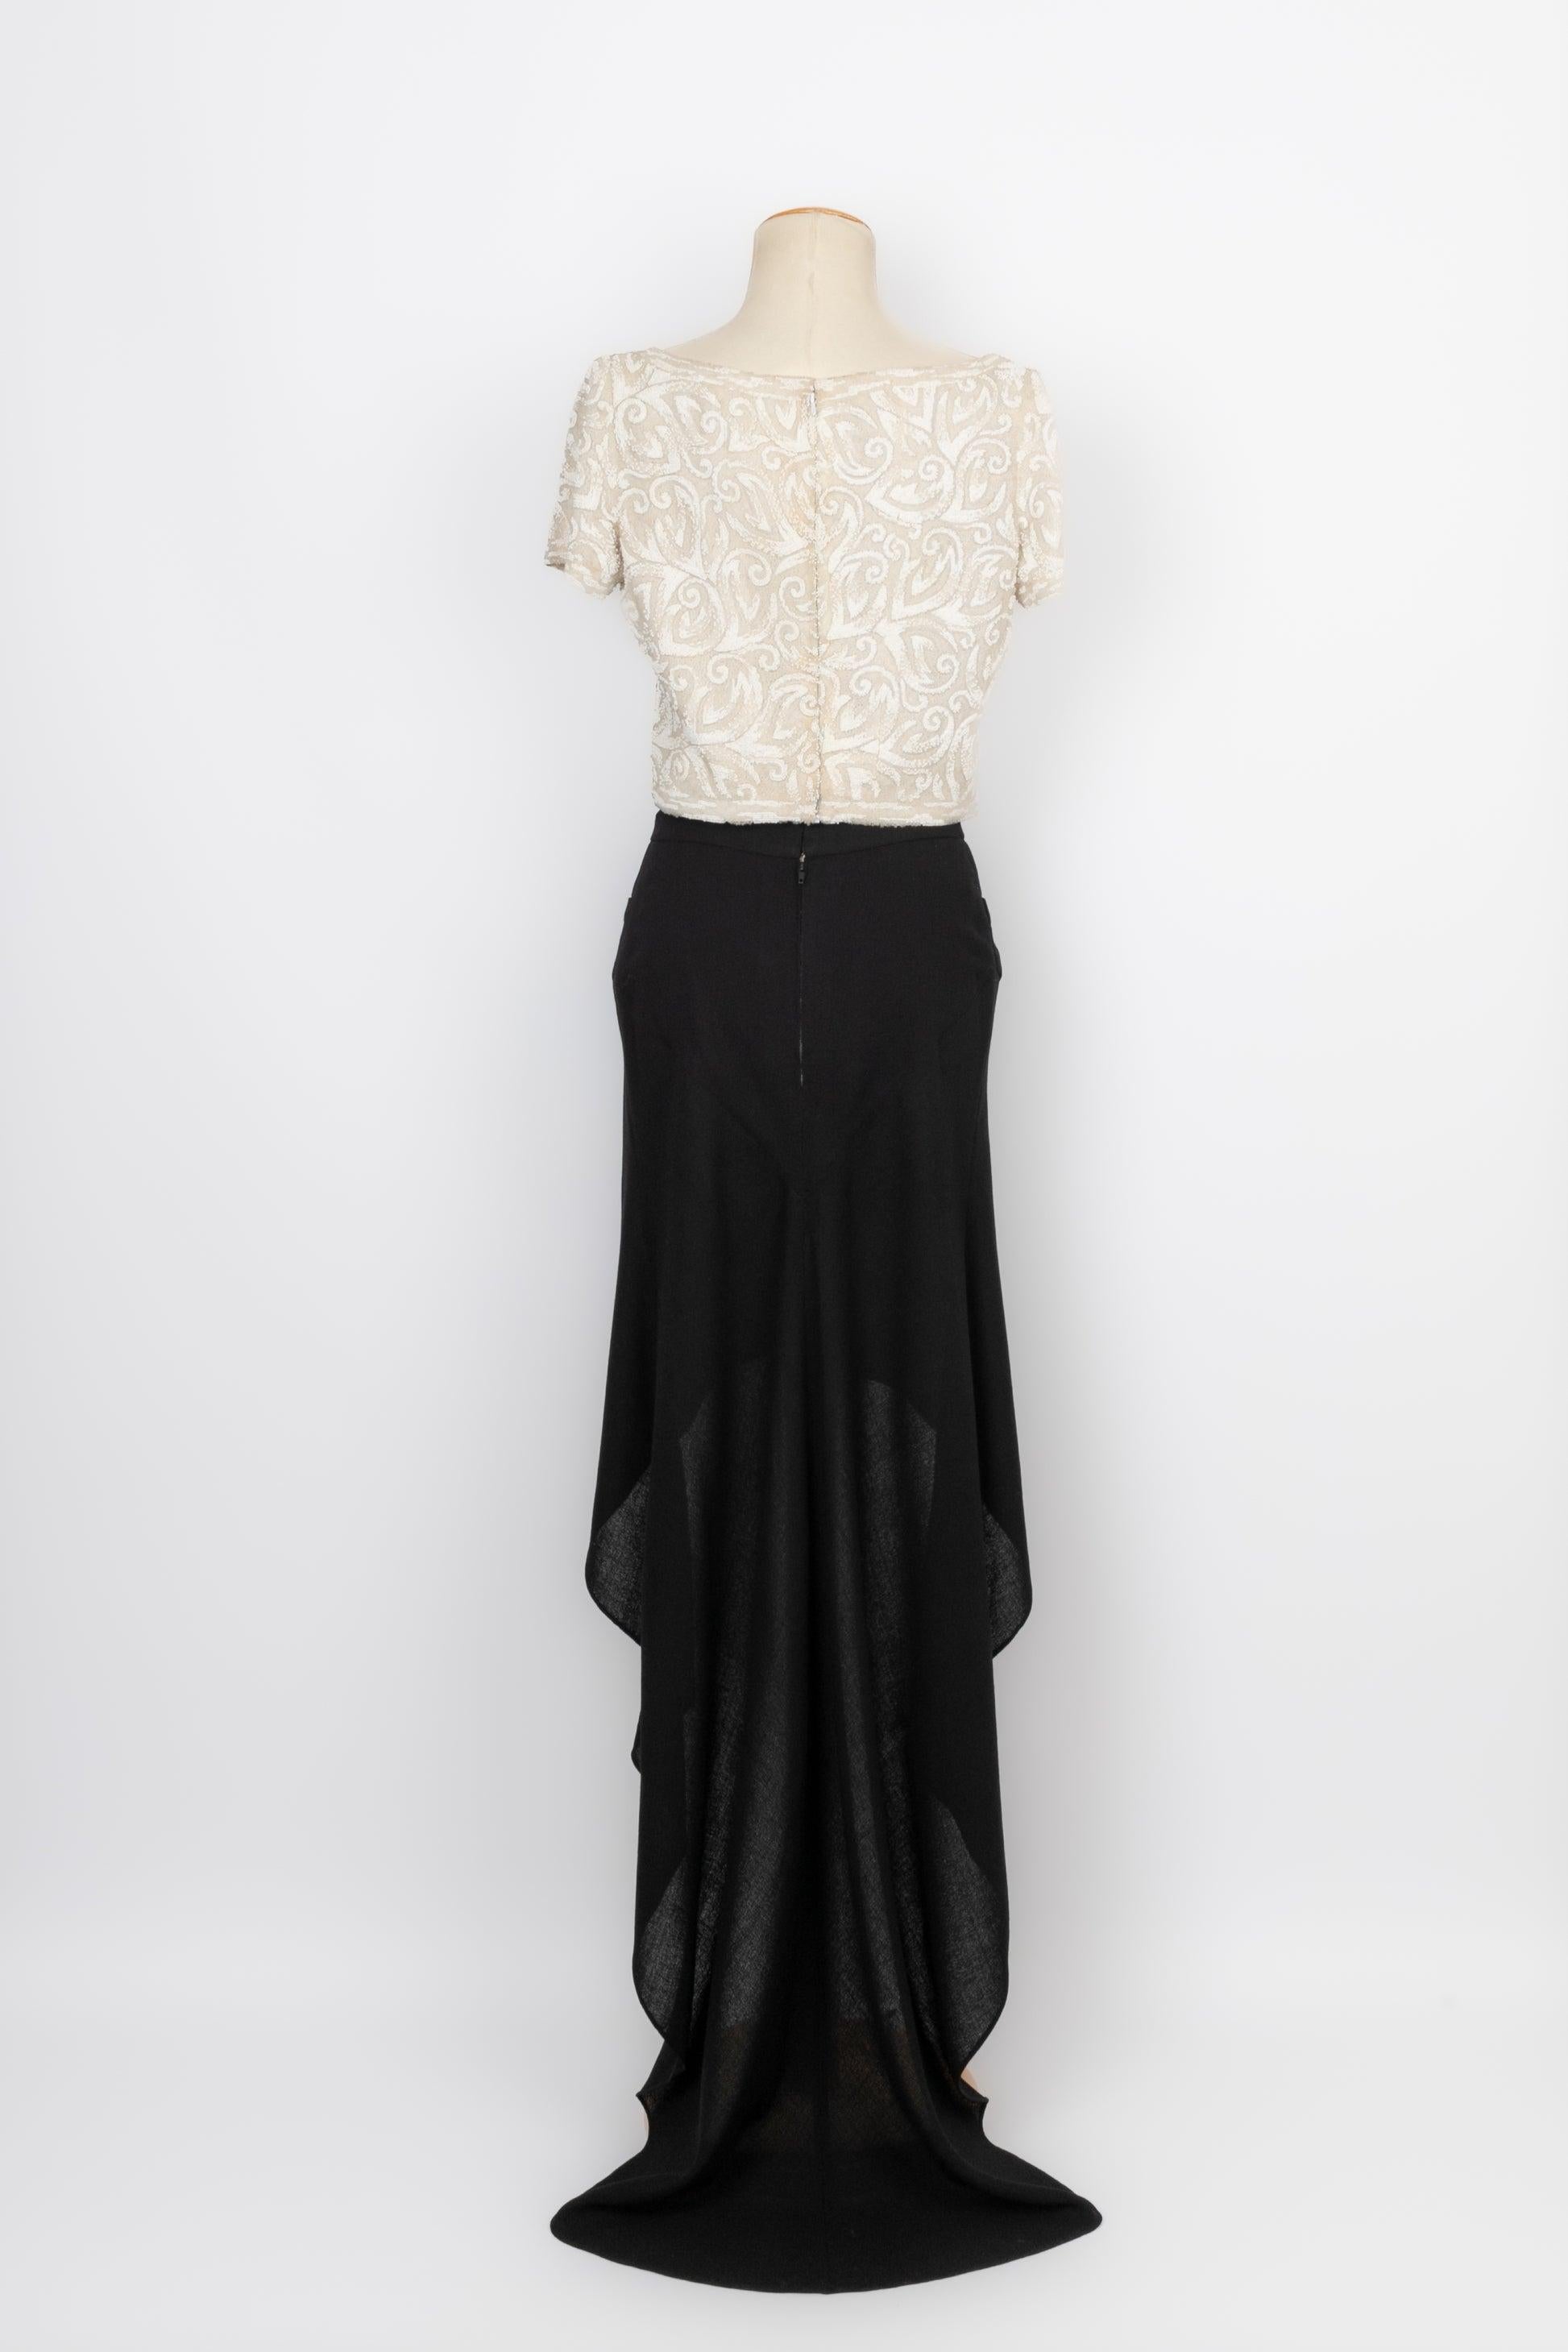 Chanel Haute Couture Set of Blouse with Crepe Skirt, 1994 In Good Condition For Sale In SAINT-OUEN-SUR-SEINE, FR